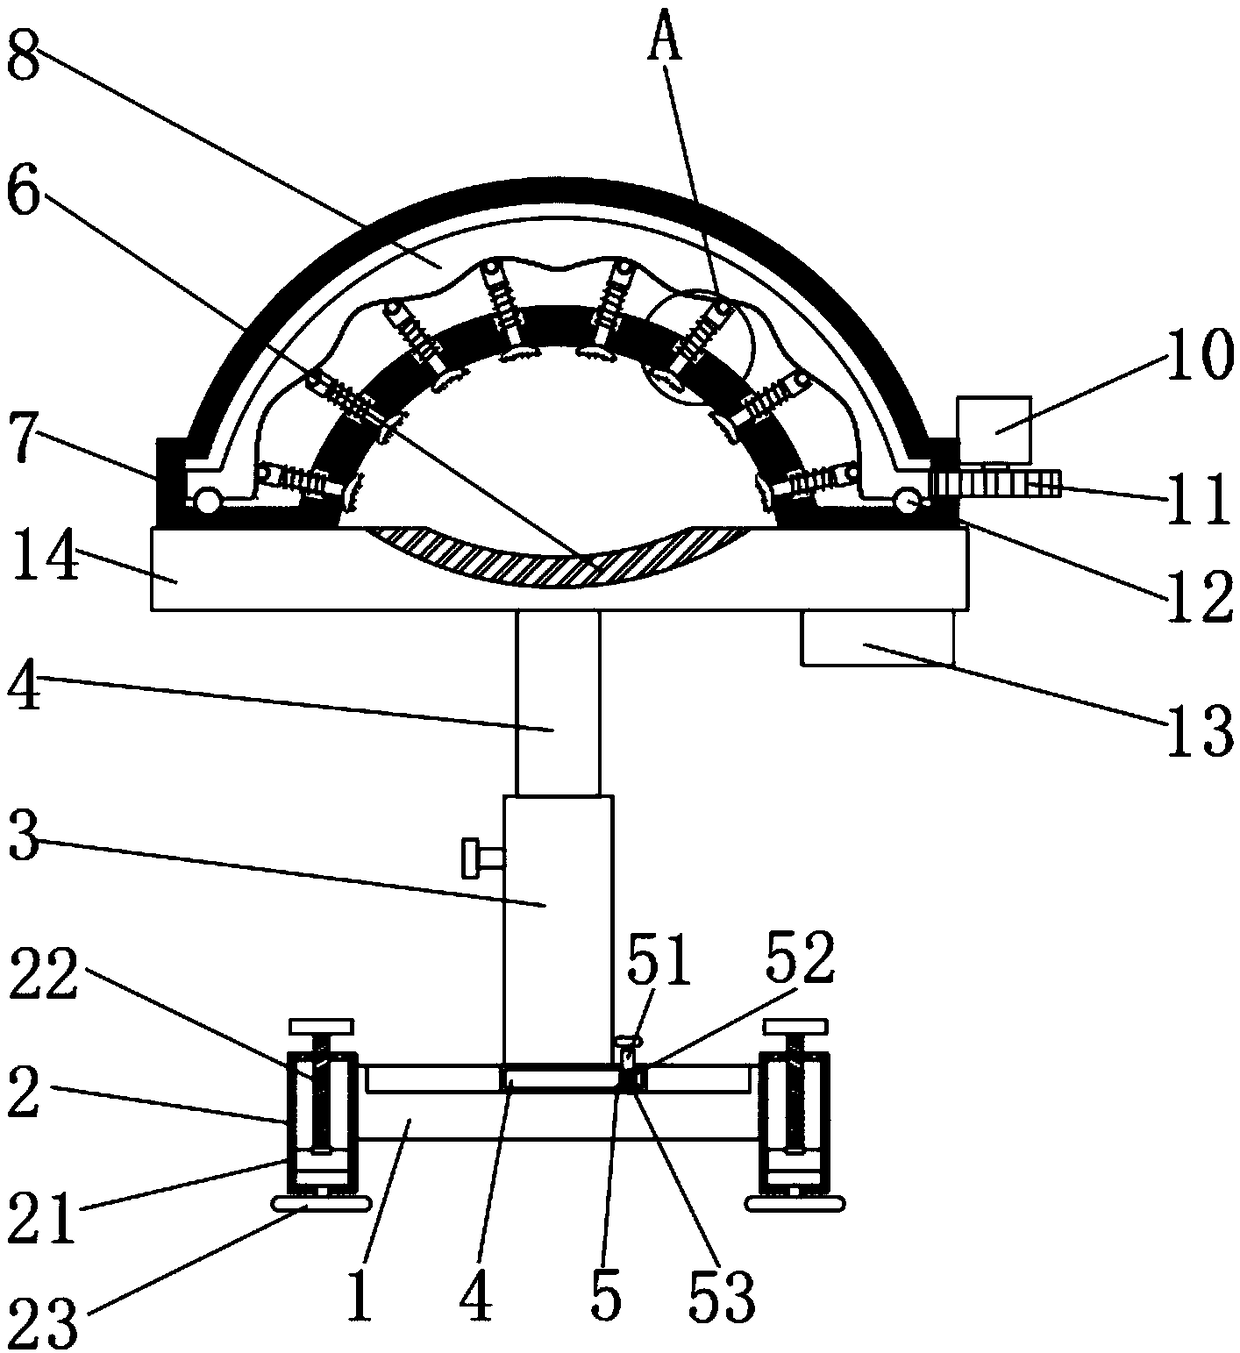 Supporting frame for ophthalmologic fundus laser